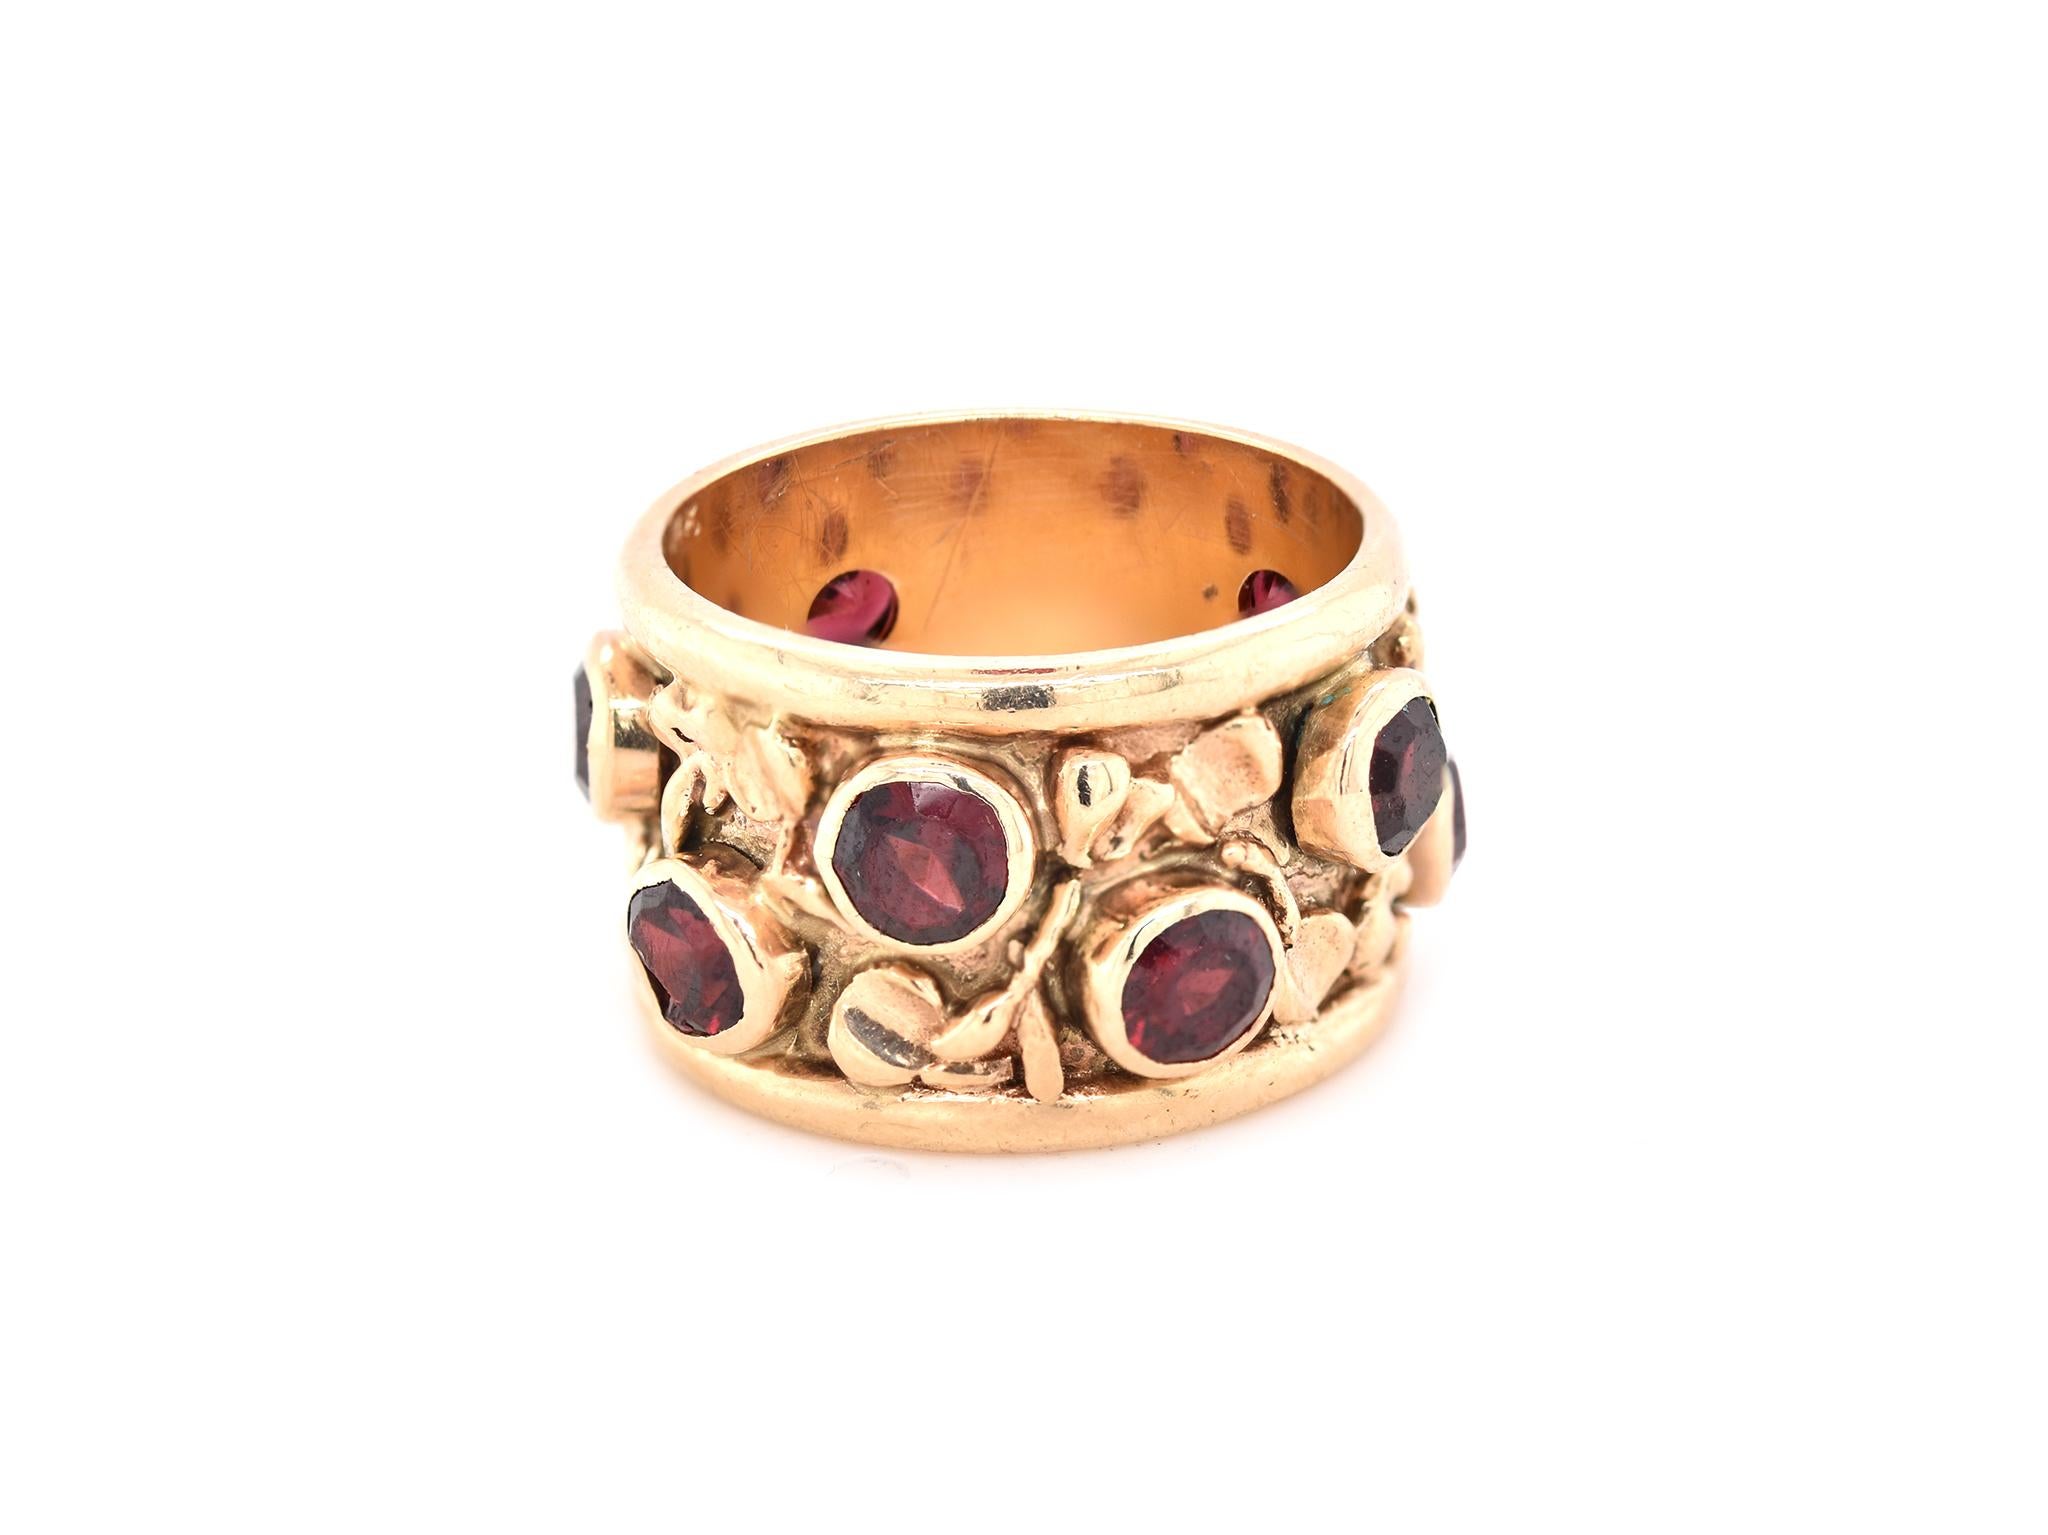 Material: 14K yellow gold 
Ring Size: 5 (please allow up to 2 additional business days for sizing requests)
Dimensions: ring top measures 12mm wide
Weight: 7.85 grams
